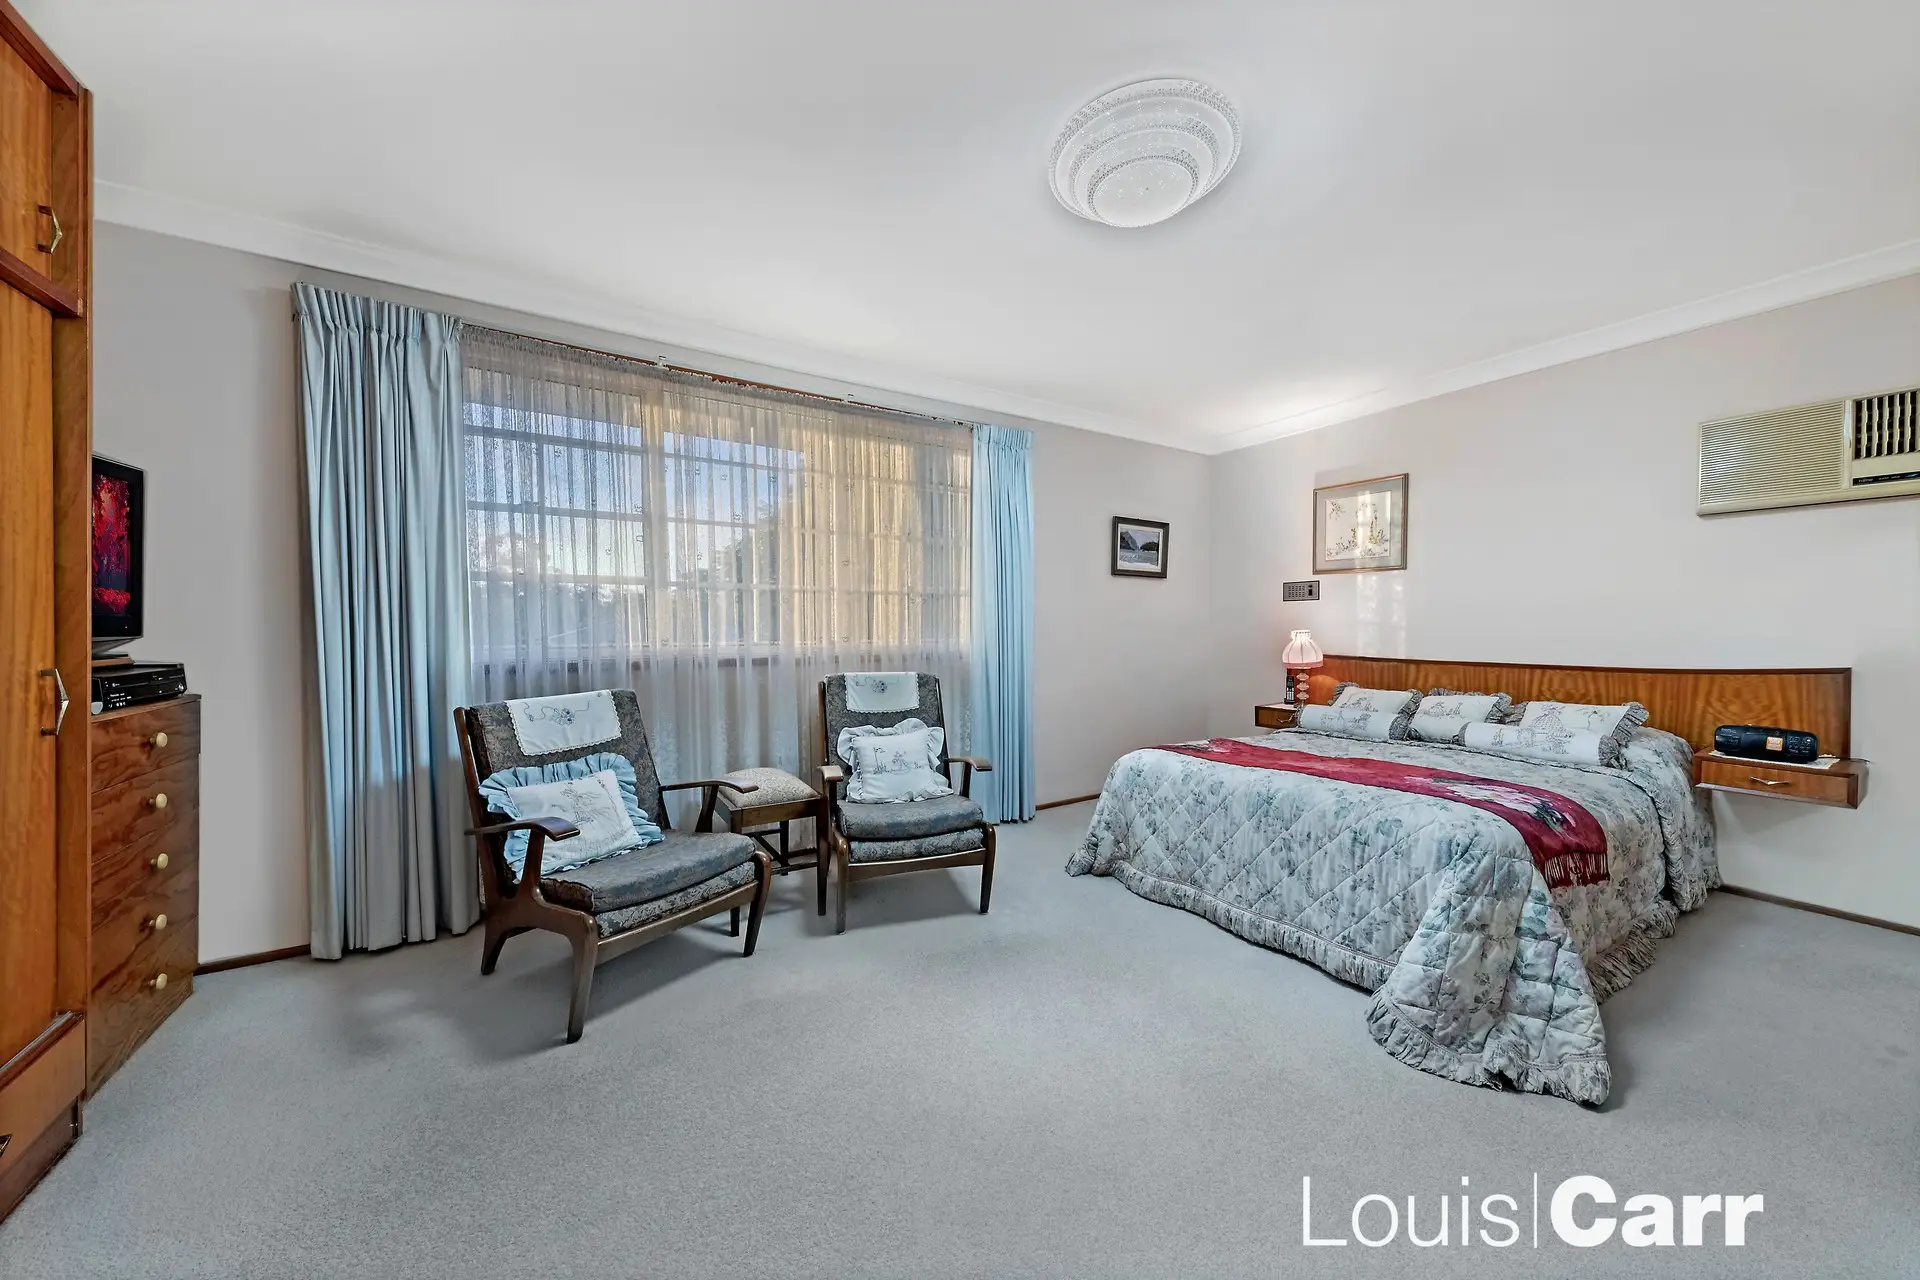 Photo #8: 59 Cedarwood Drive, Cherrybrook - Sold by Louis Carr Real Estate